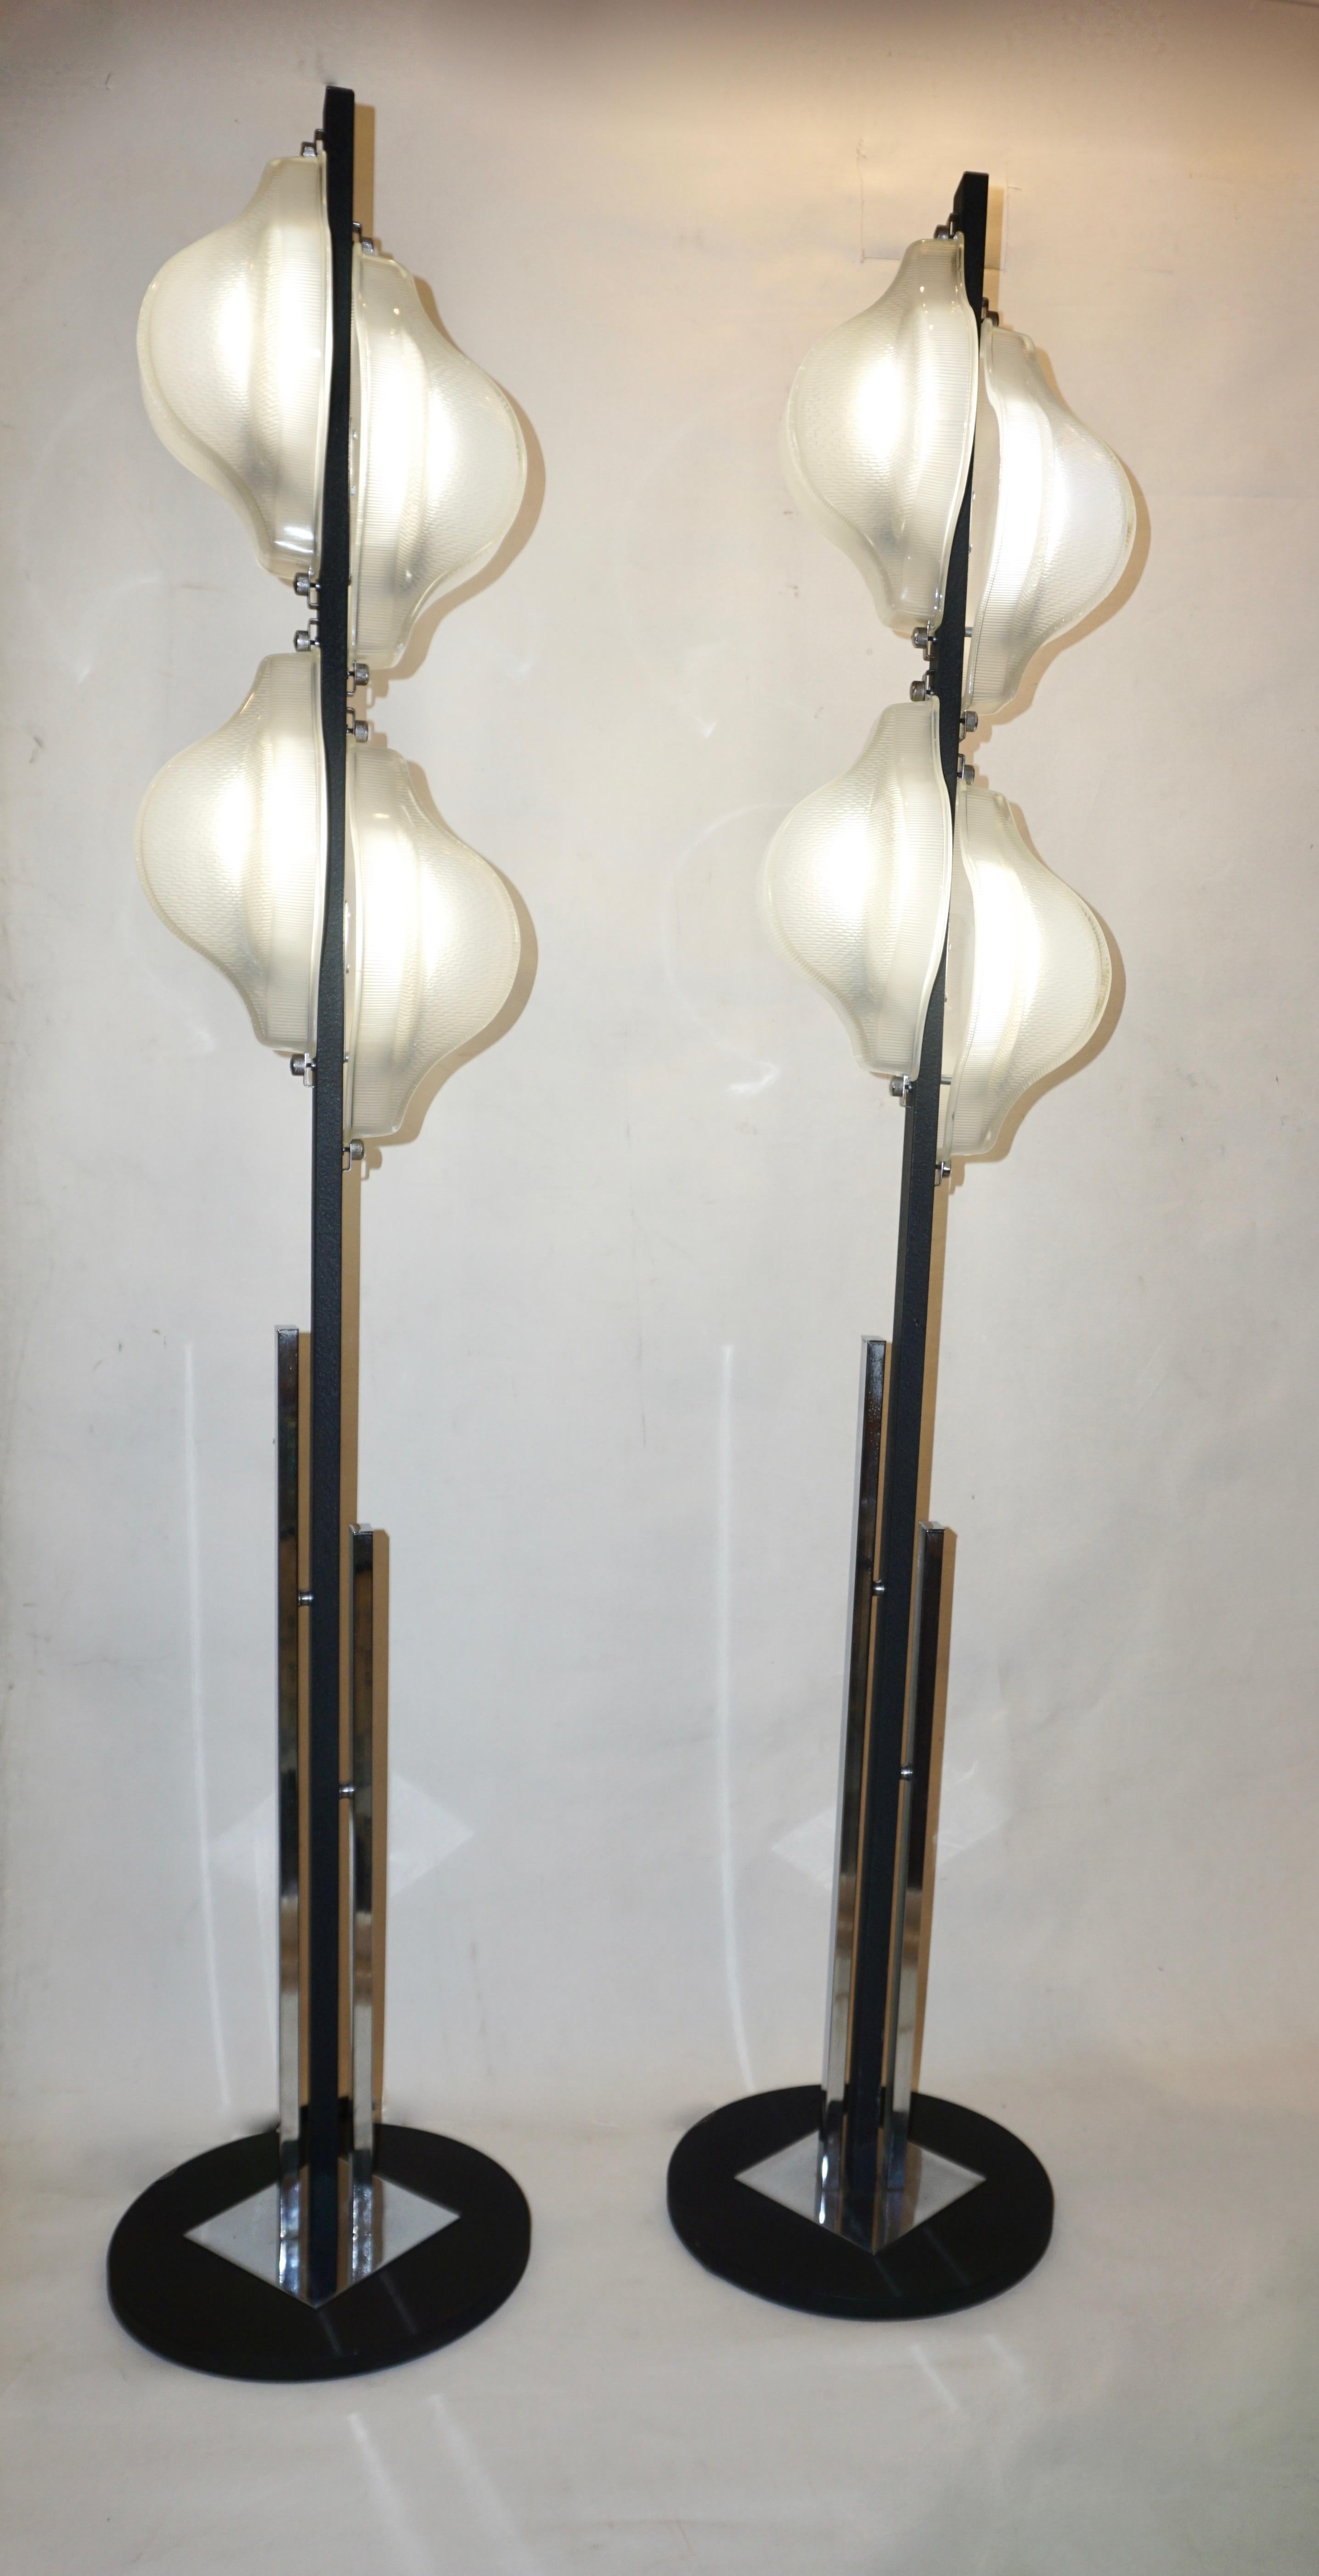 1960s Italian Pair of Minimalist White and Black Organic Chrome Floor Lamps For Sale 5